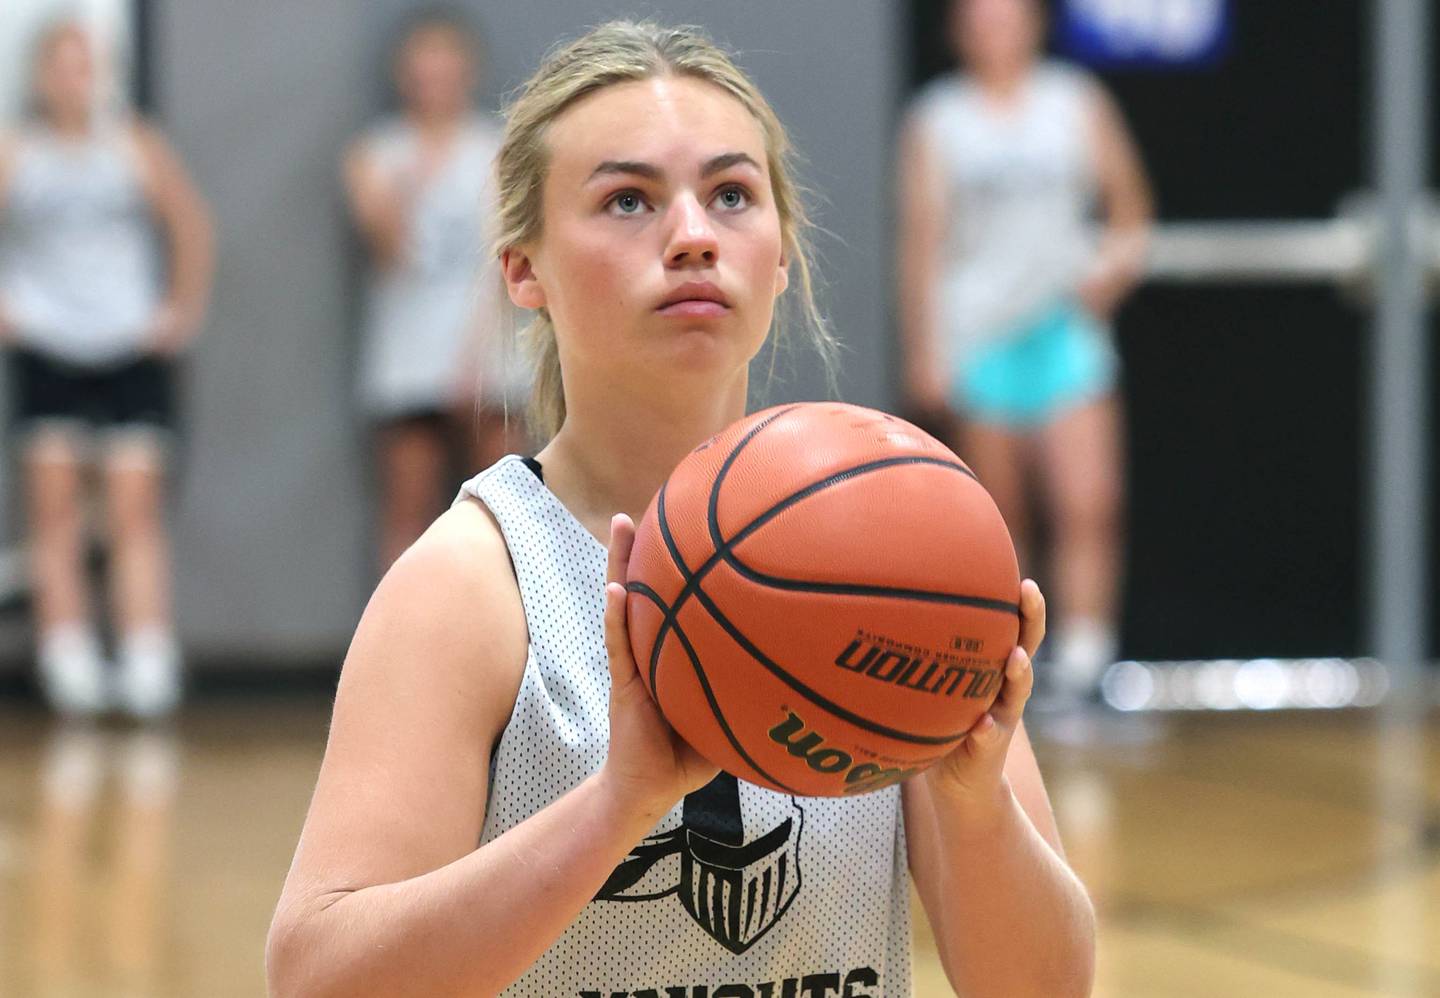 Kaneland's Berlyn Ruh shoots a freethrow during a drill Monday, June 27, 2022, at practice in the school in Maple Park.